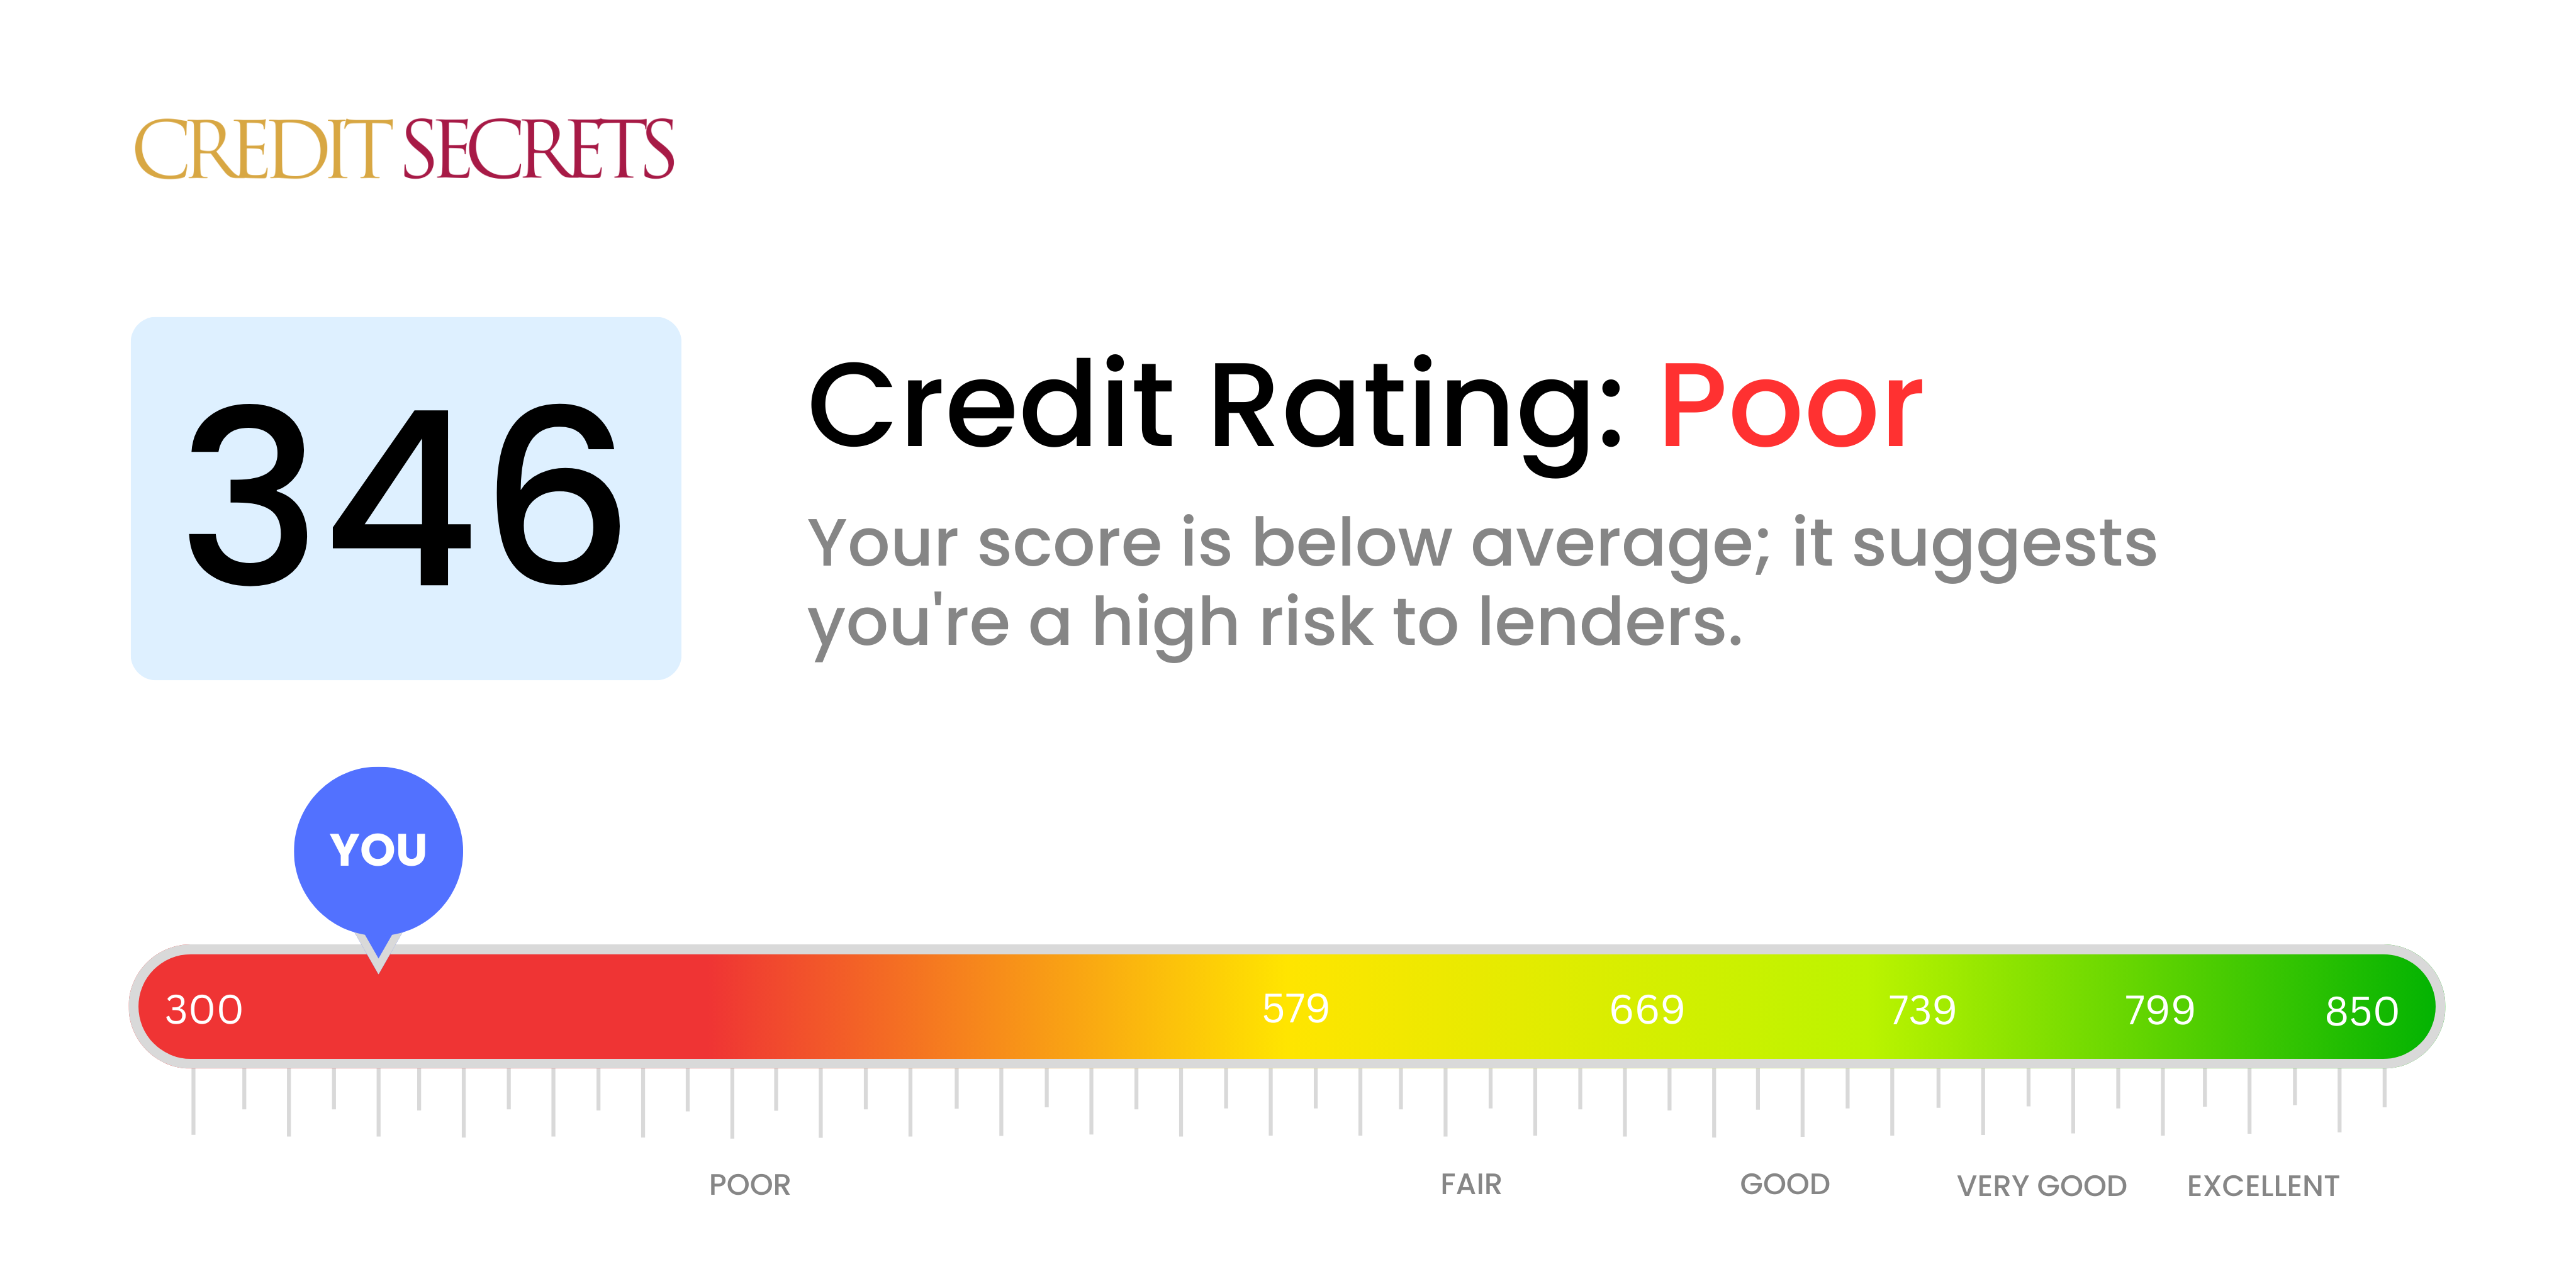 Is 346 a good credit score?